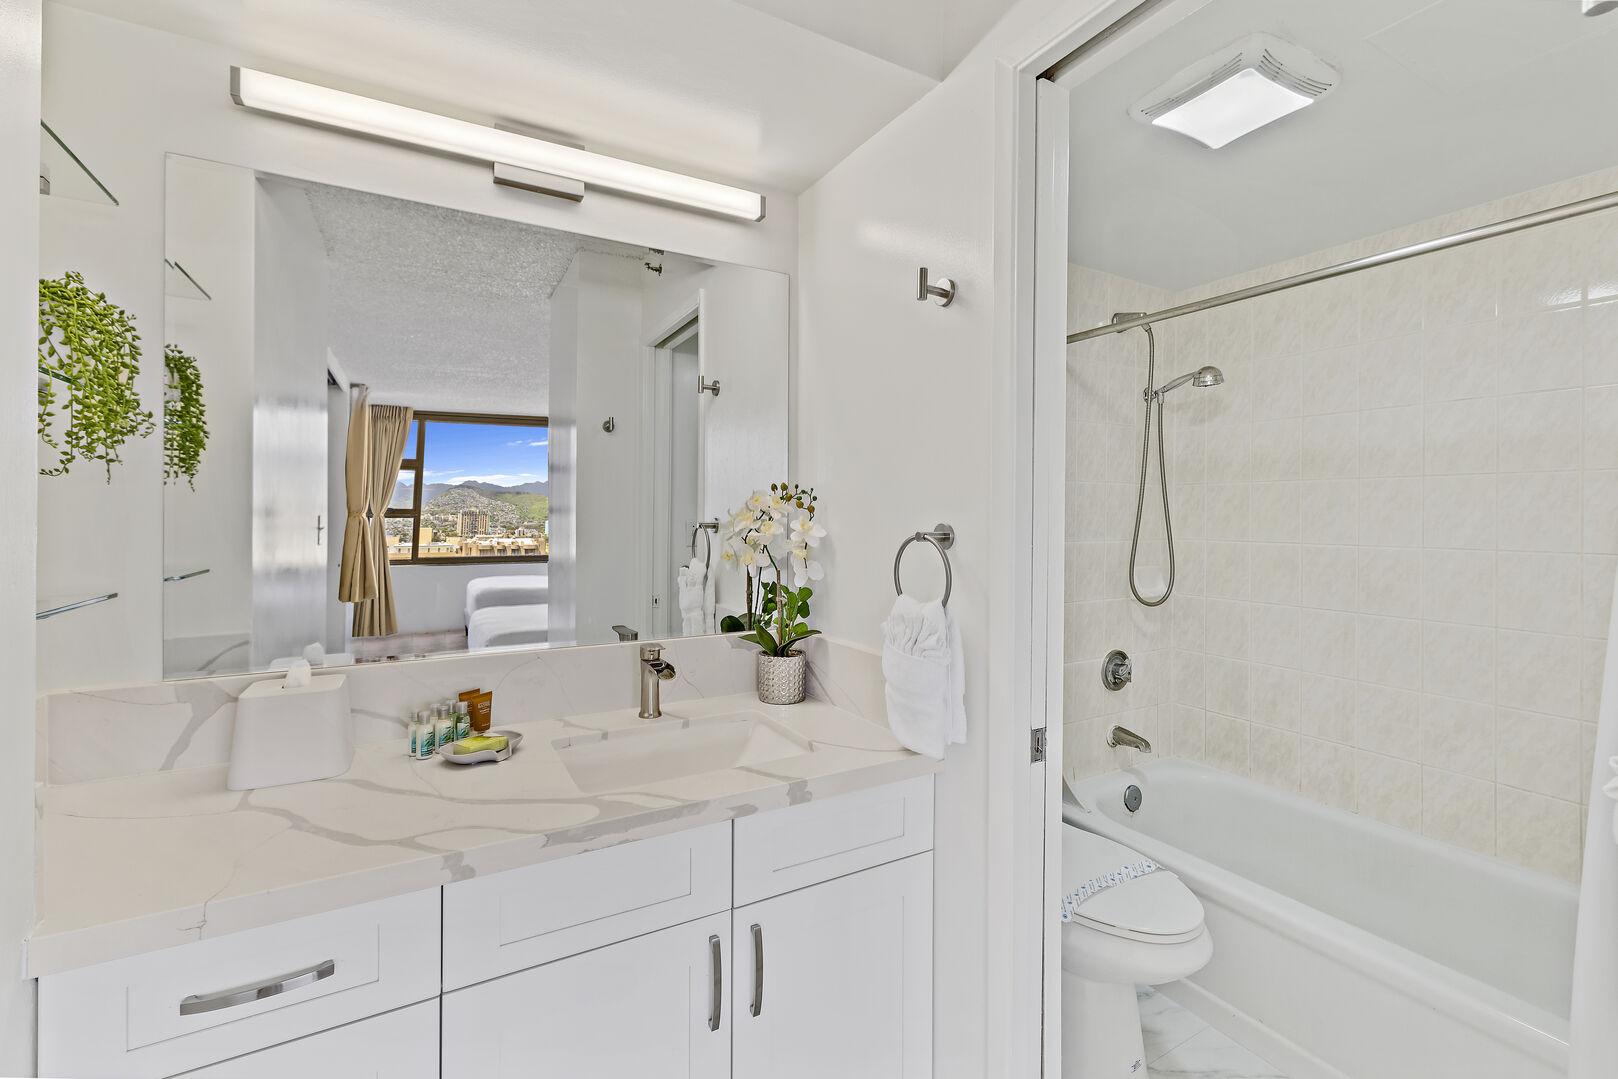 Full bathroom with tub and shower combo.